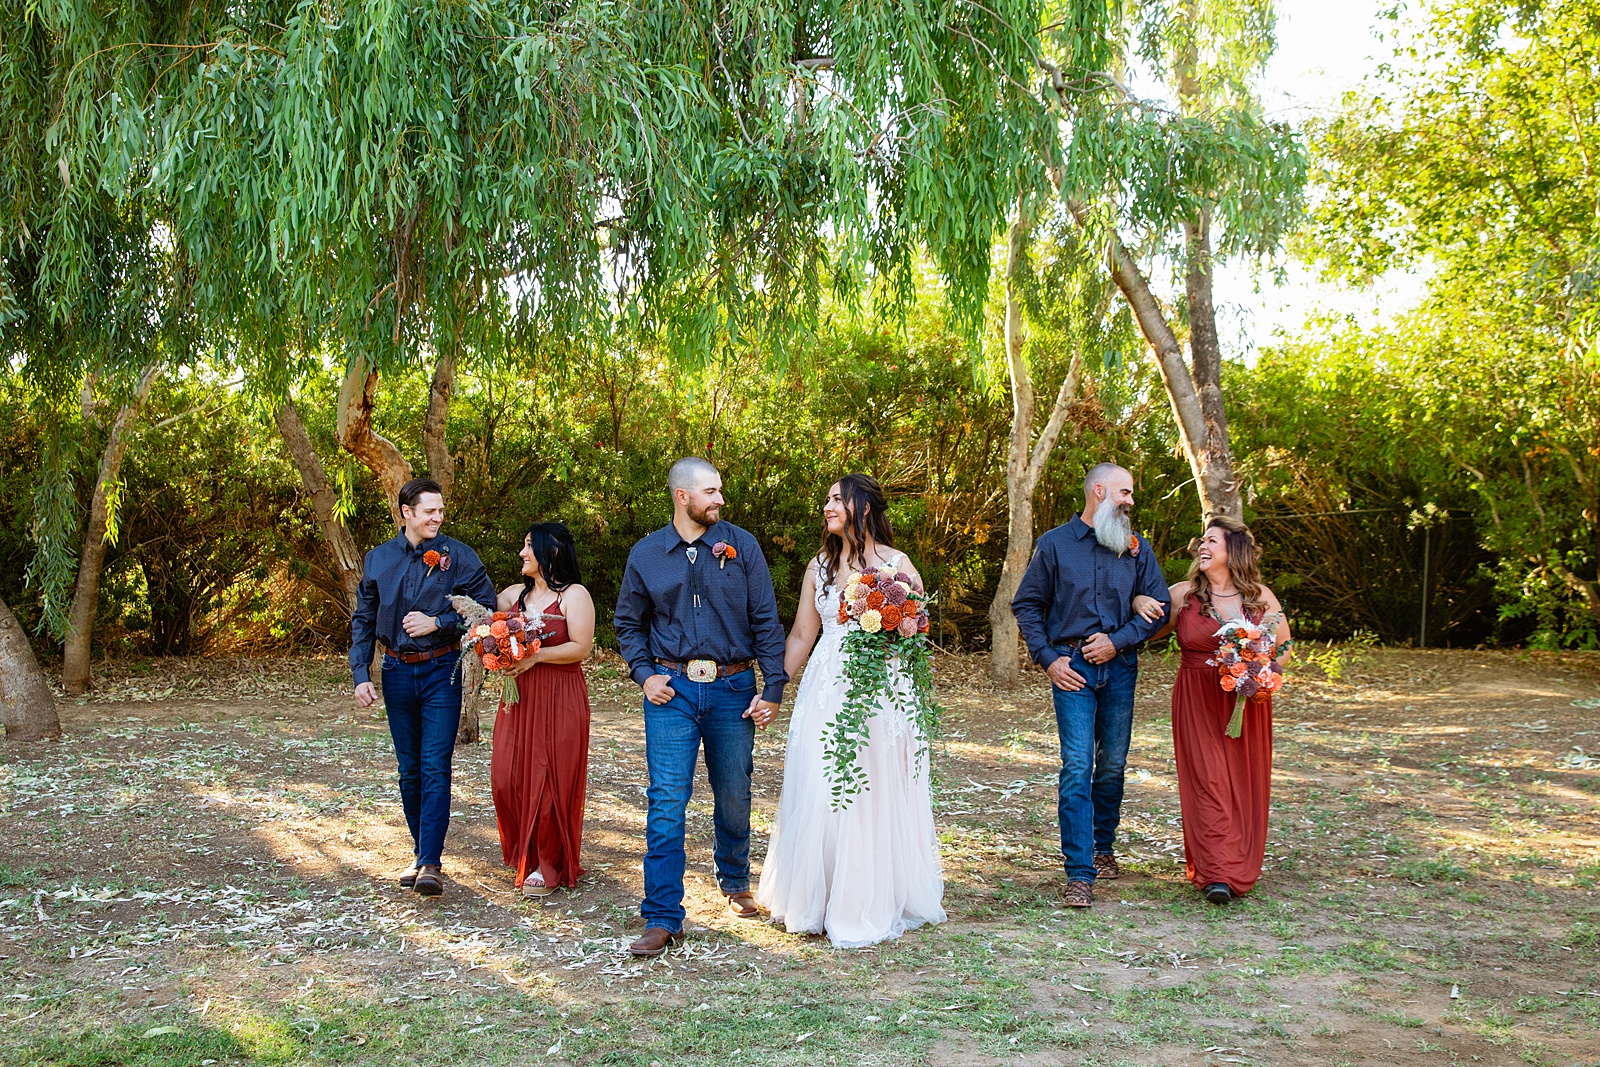 Bridal party having fun together at intimate backyard weding by Arizona wedding photographer Juniper and Co Photography.